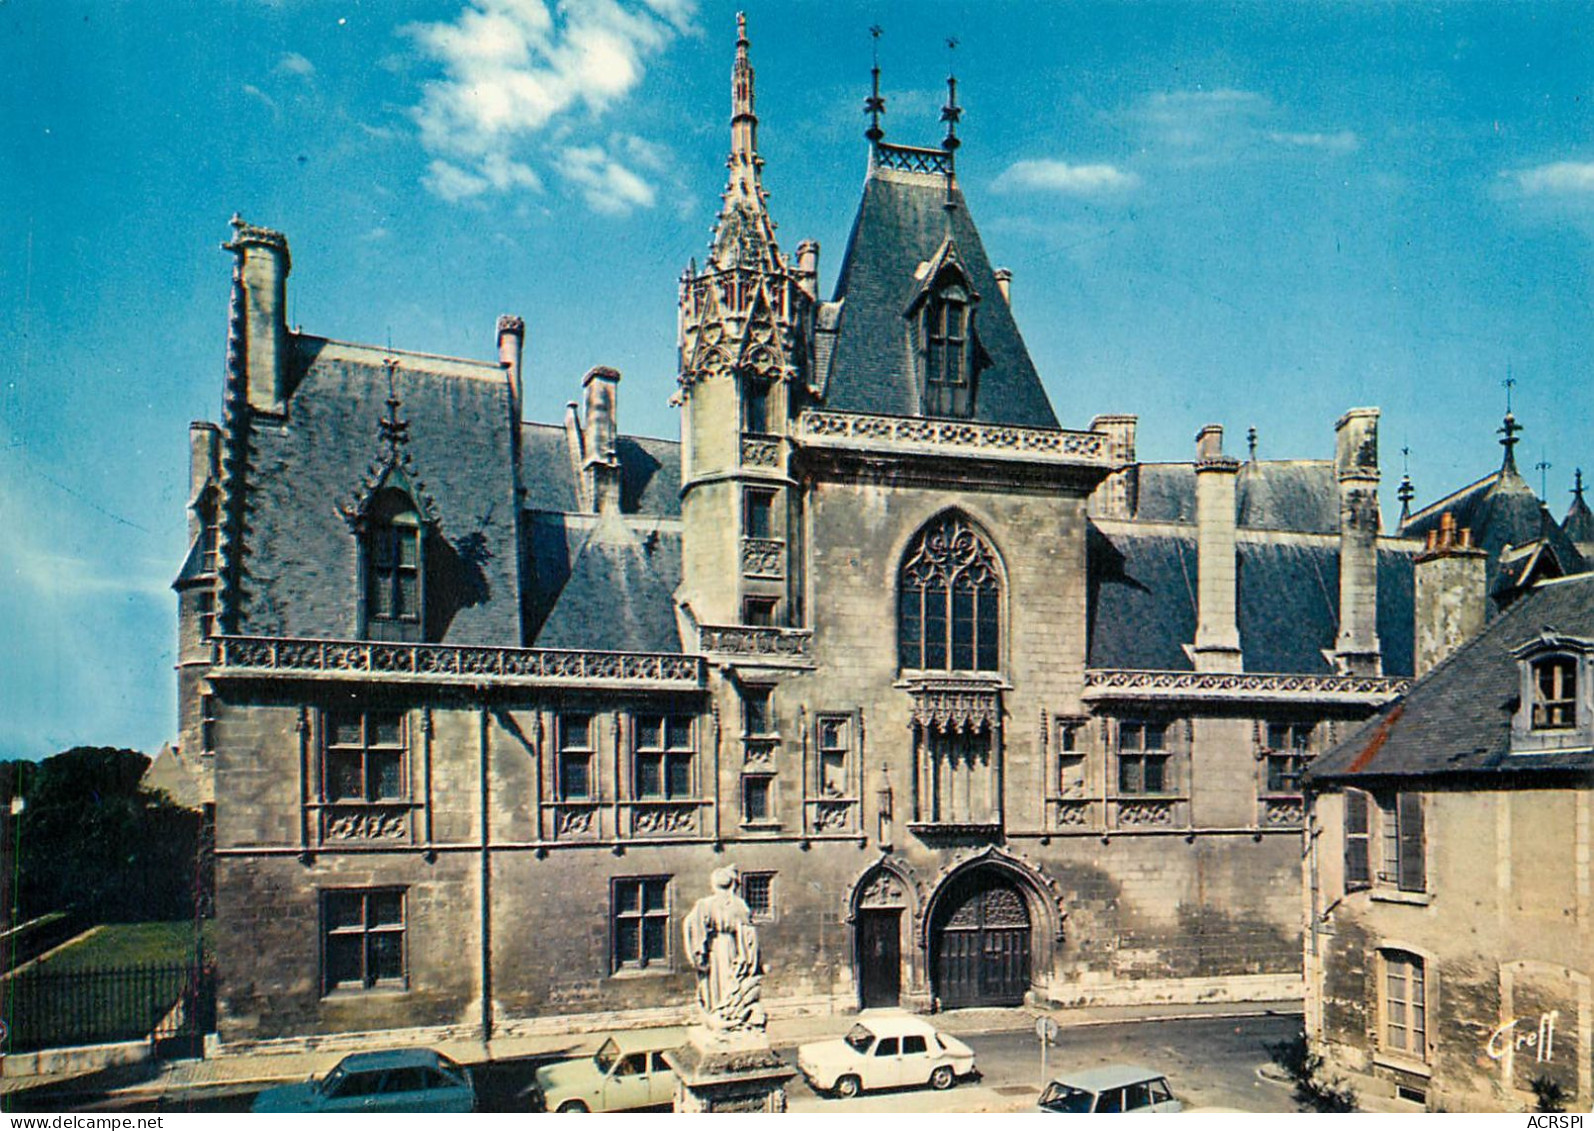  BOURGES Palais Jacques Coeur  22 (scan Recto-verso)MA2284Bis - Bourges